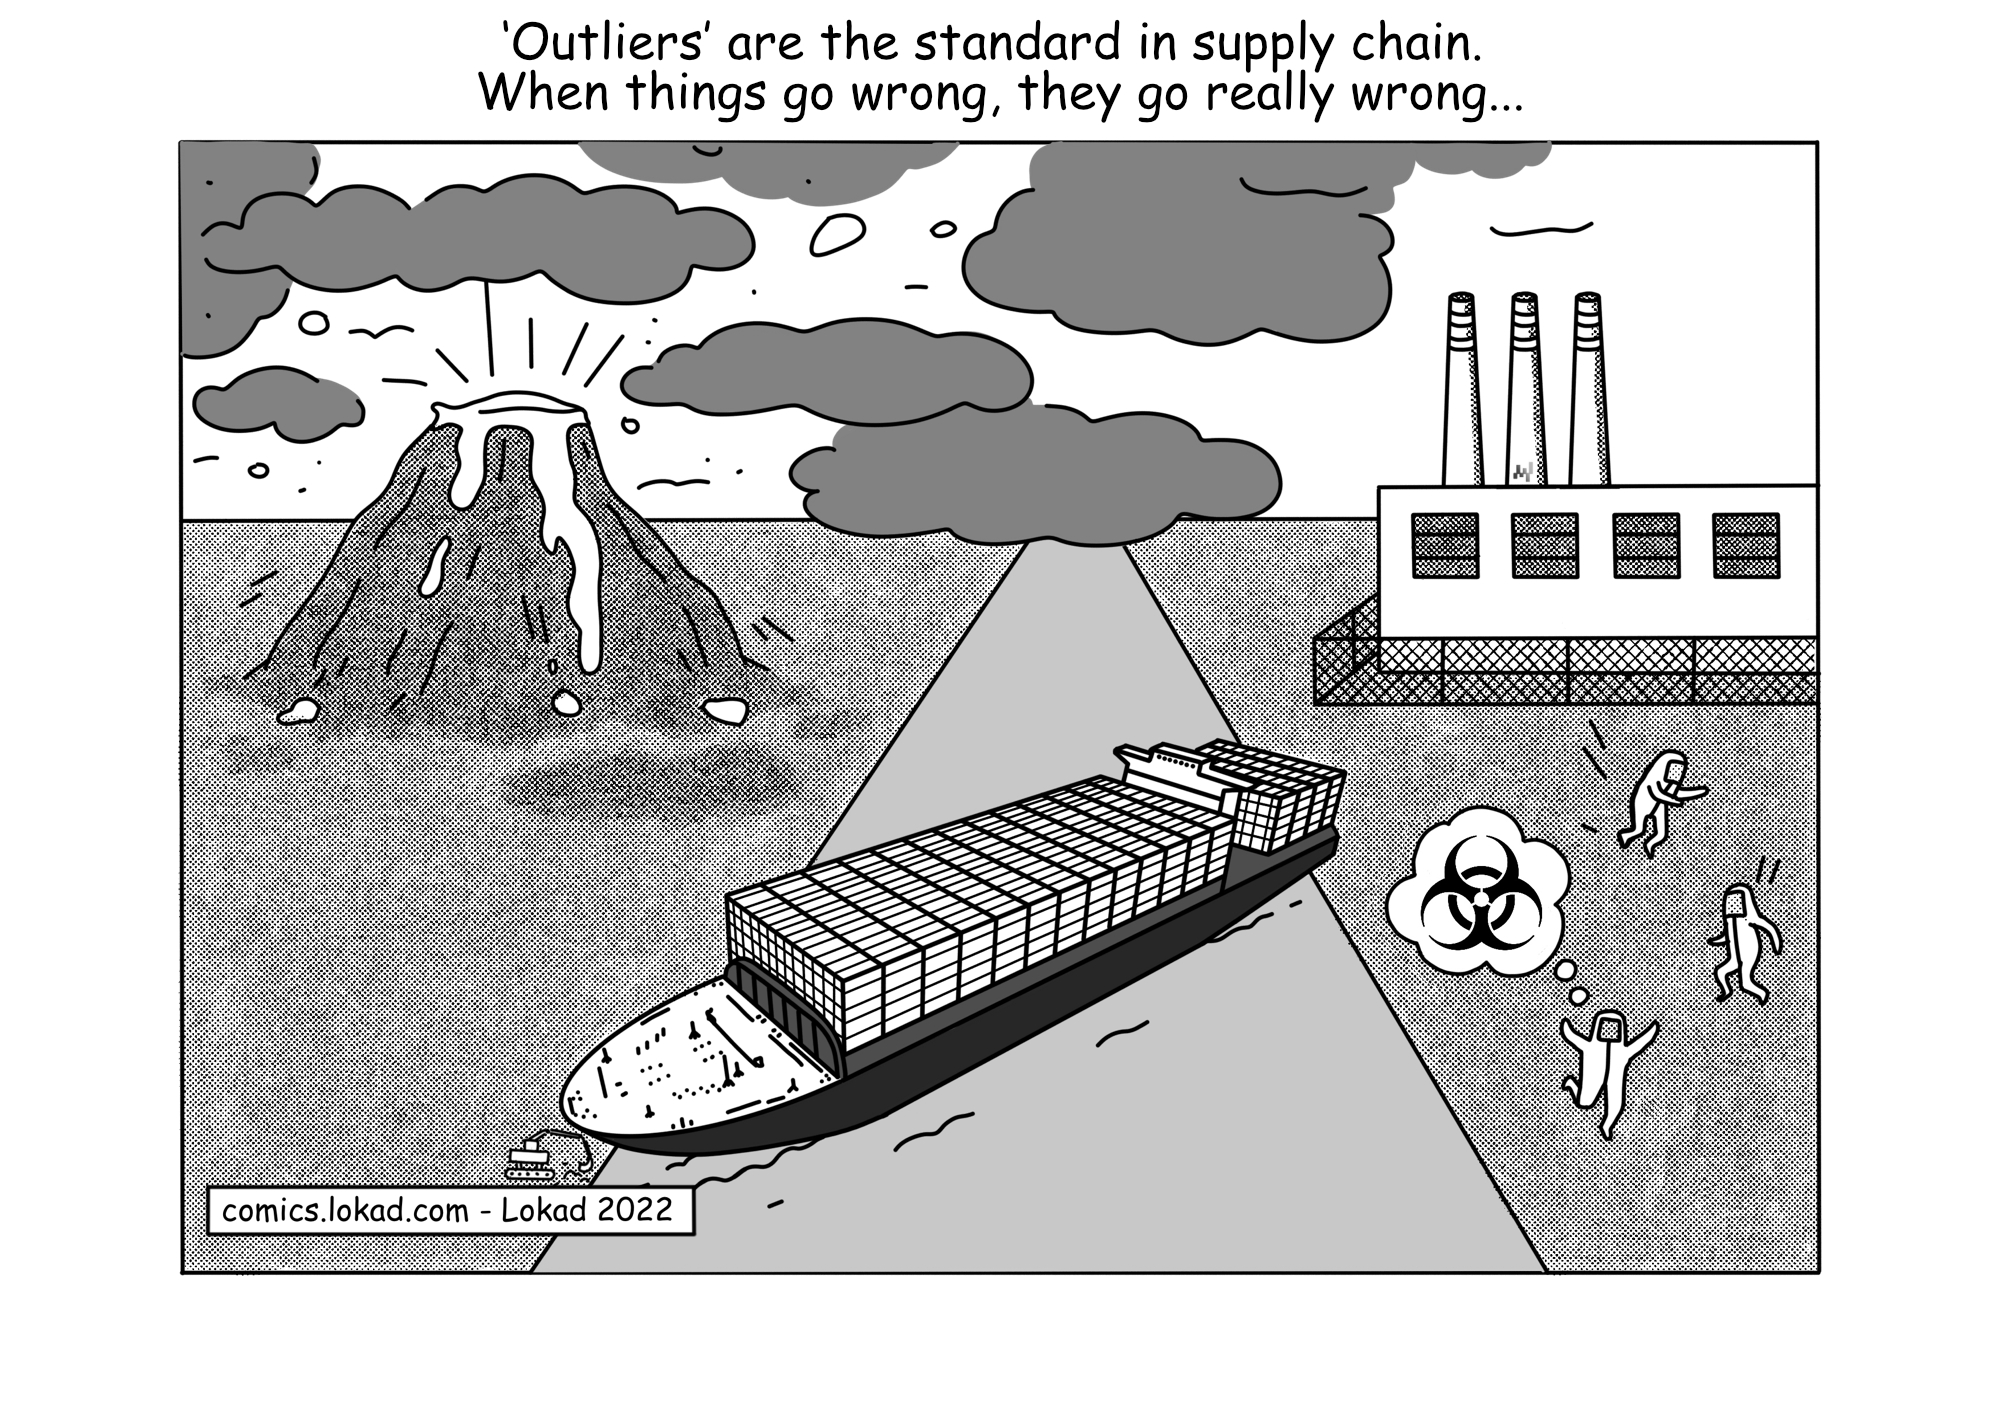 Outliers are the standards in supply chain